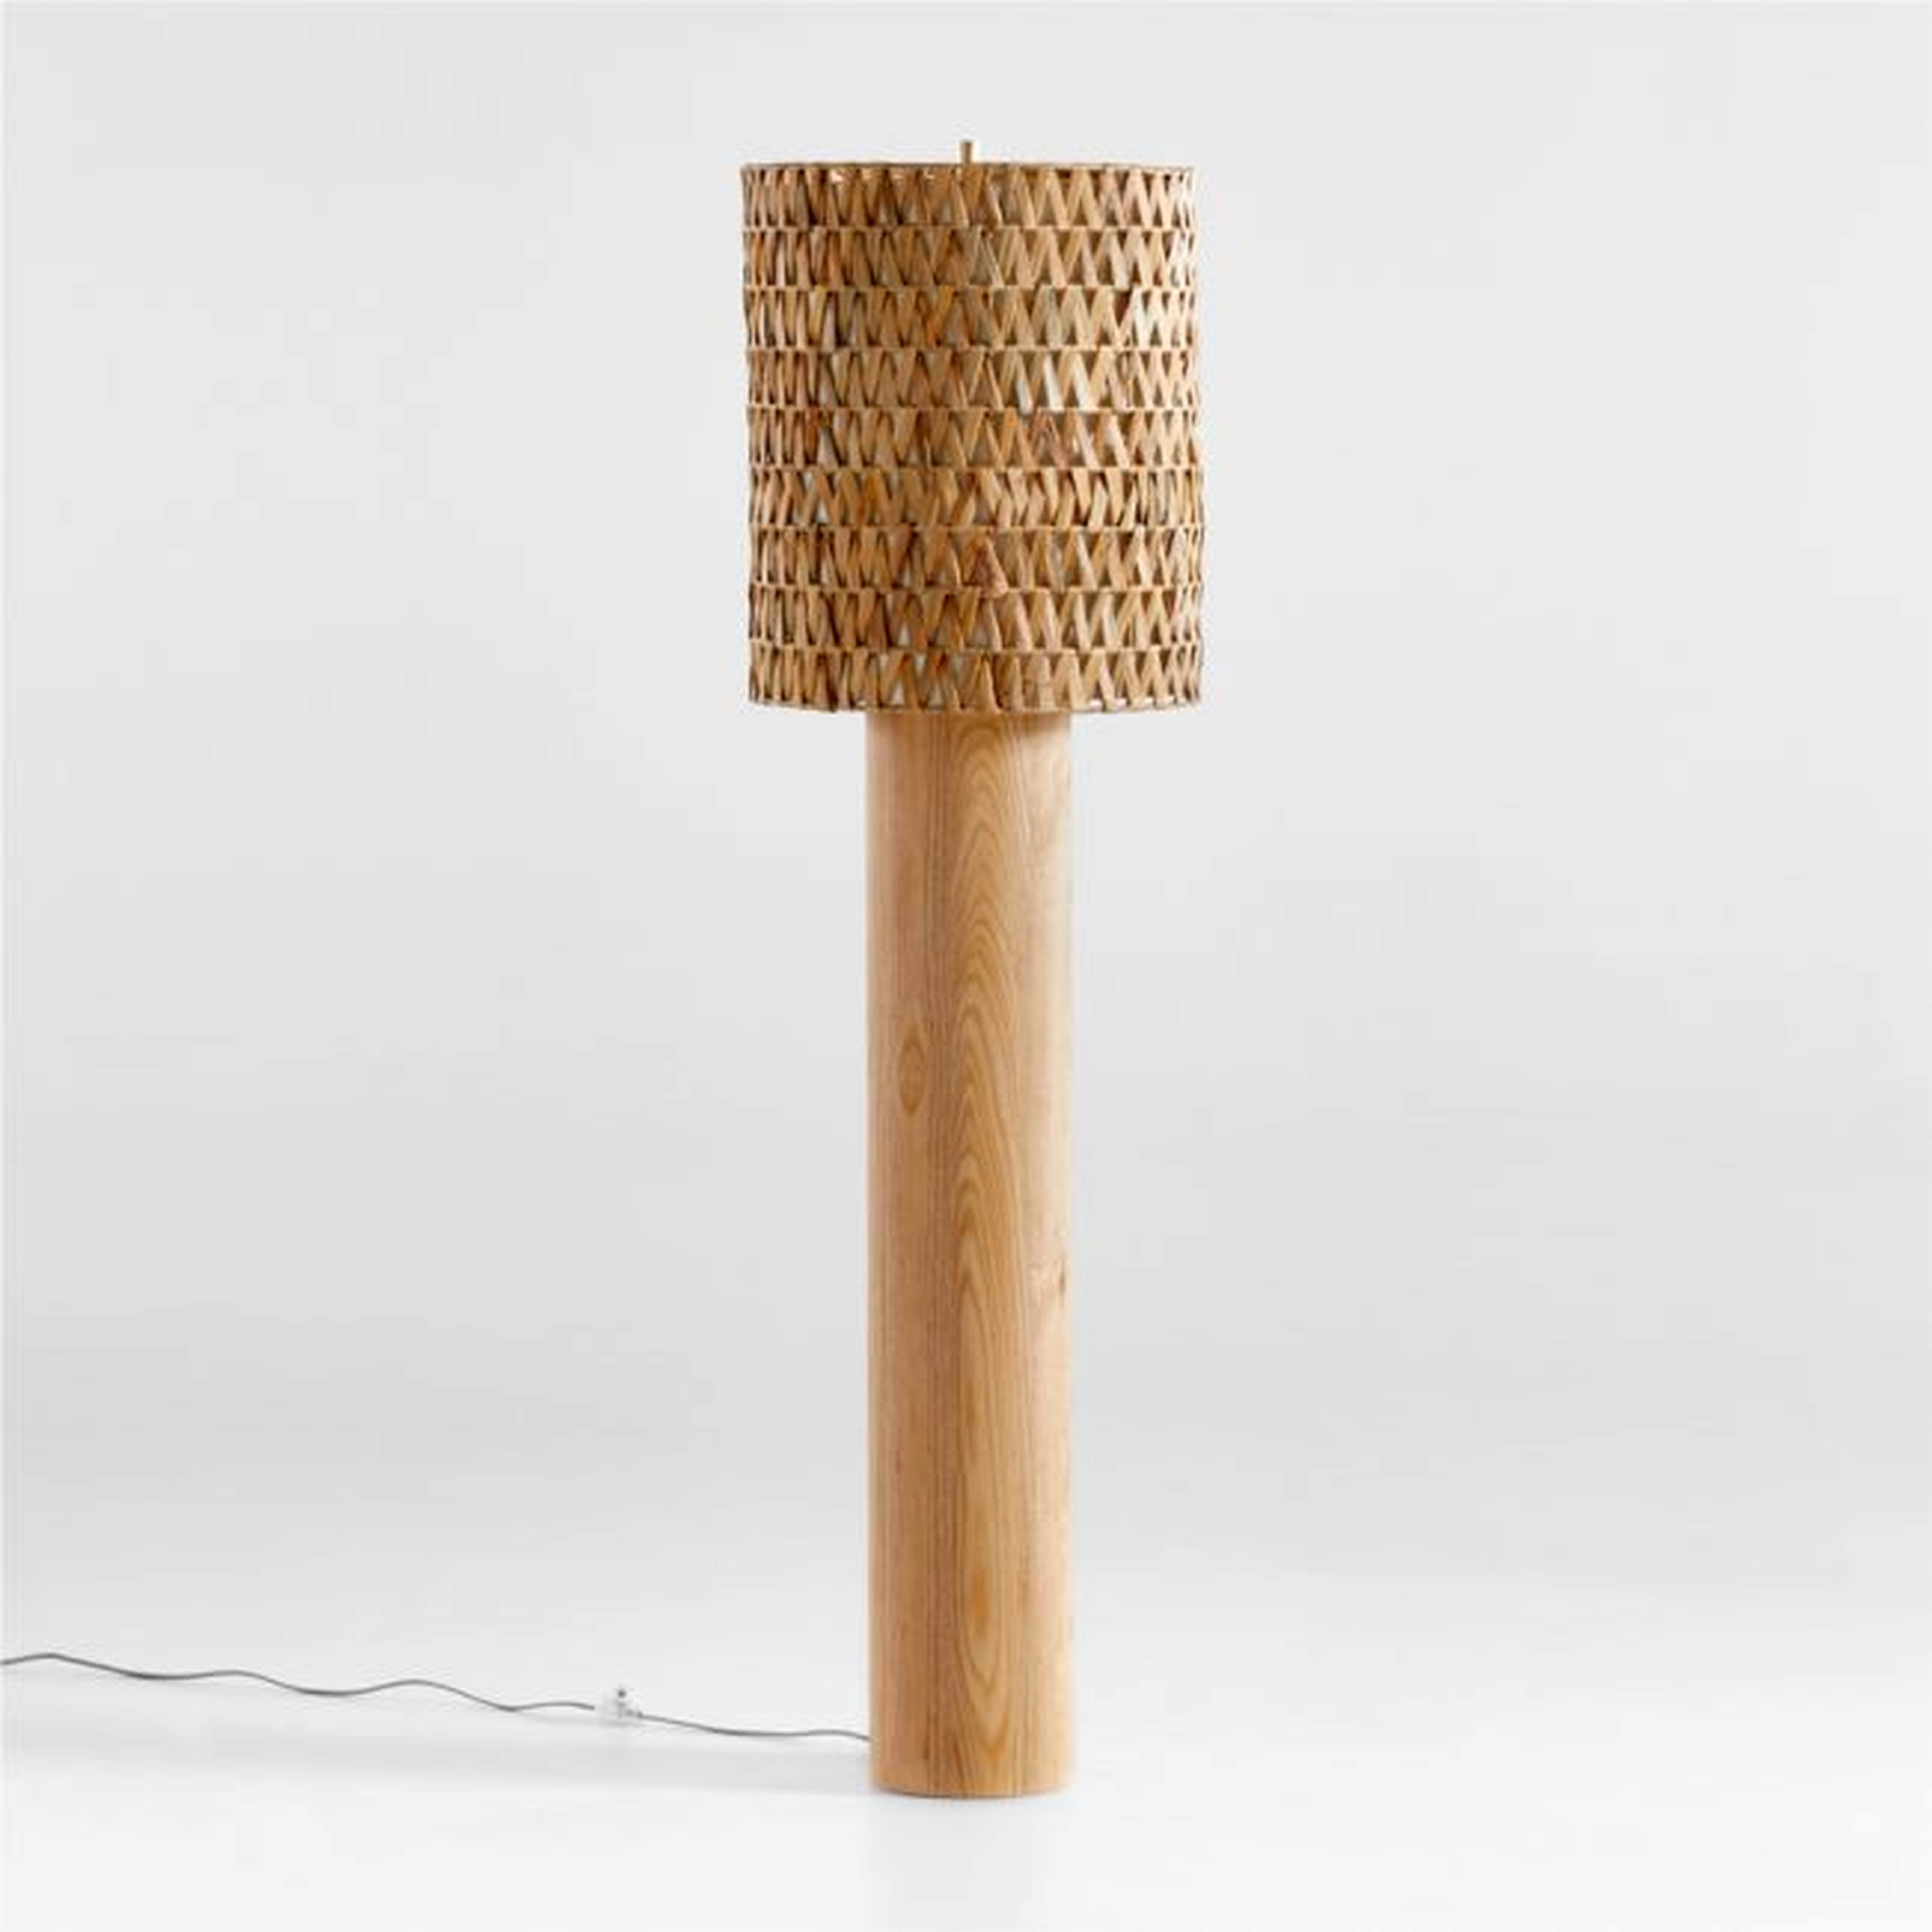 Brodie Wood Floor Lamp with Woven Shade - Crate and Barrel